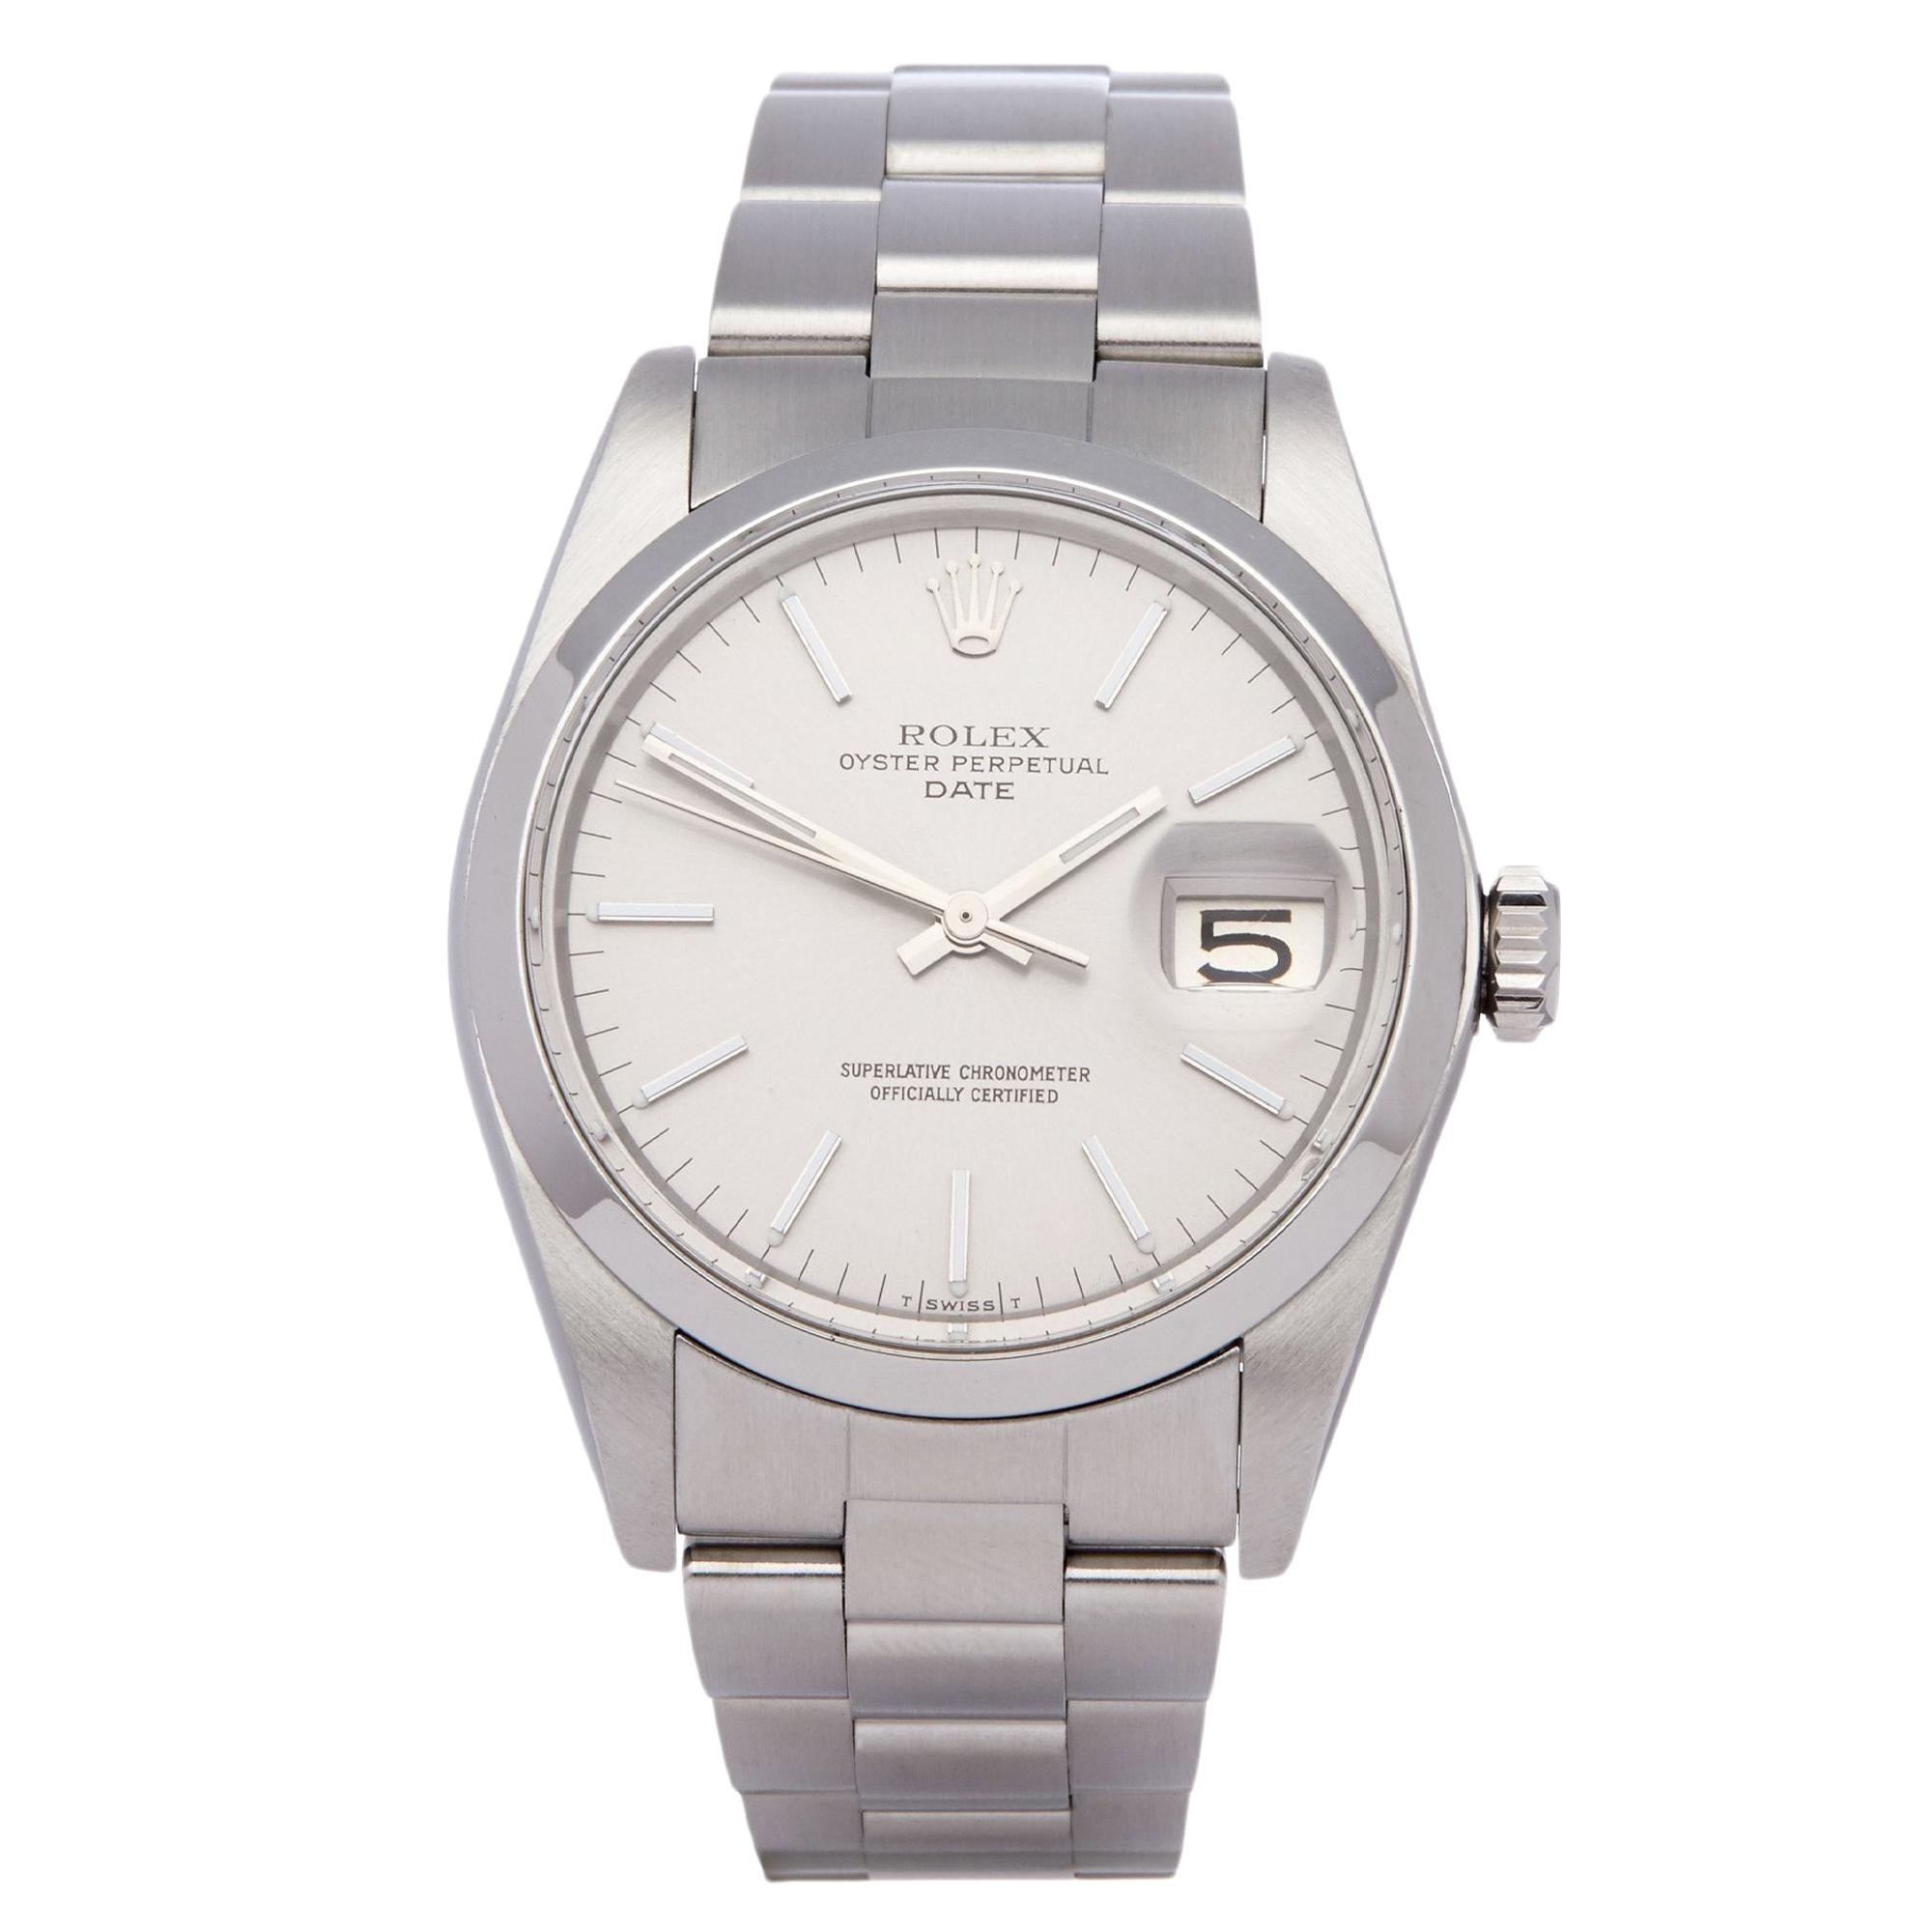 Rolex Oyster Perpetual Date 1500 Men's Stainless Steel Watch